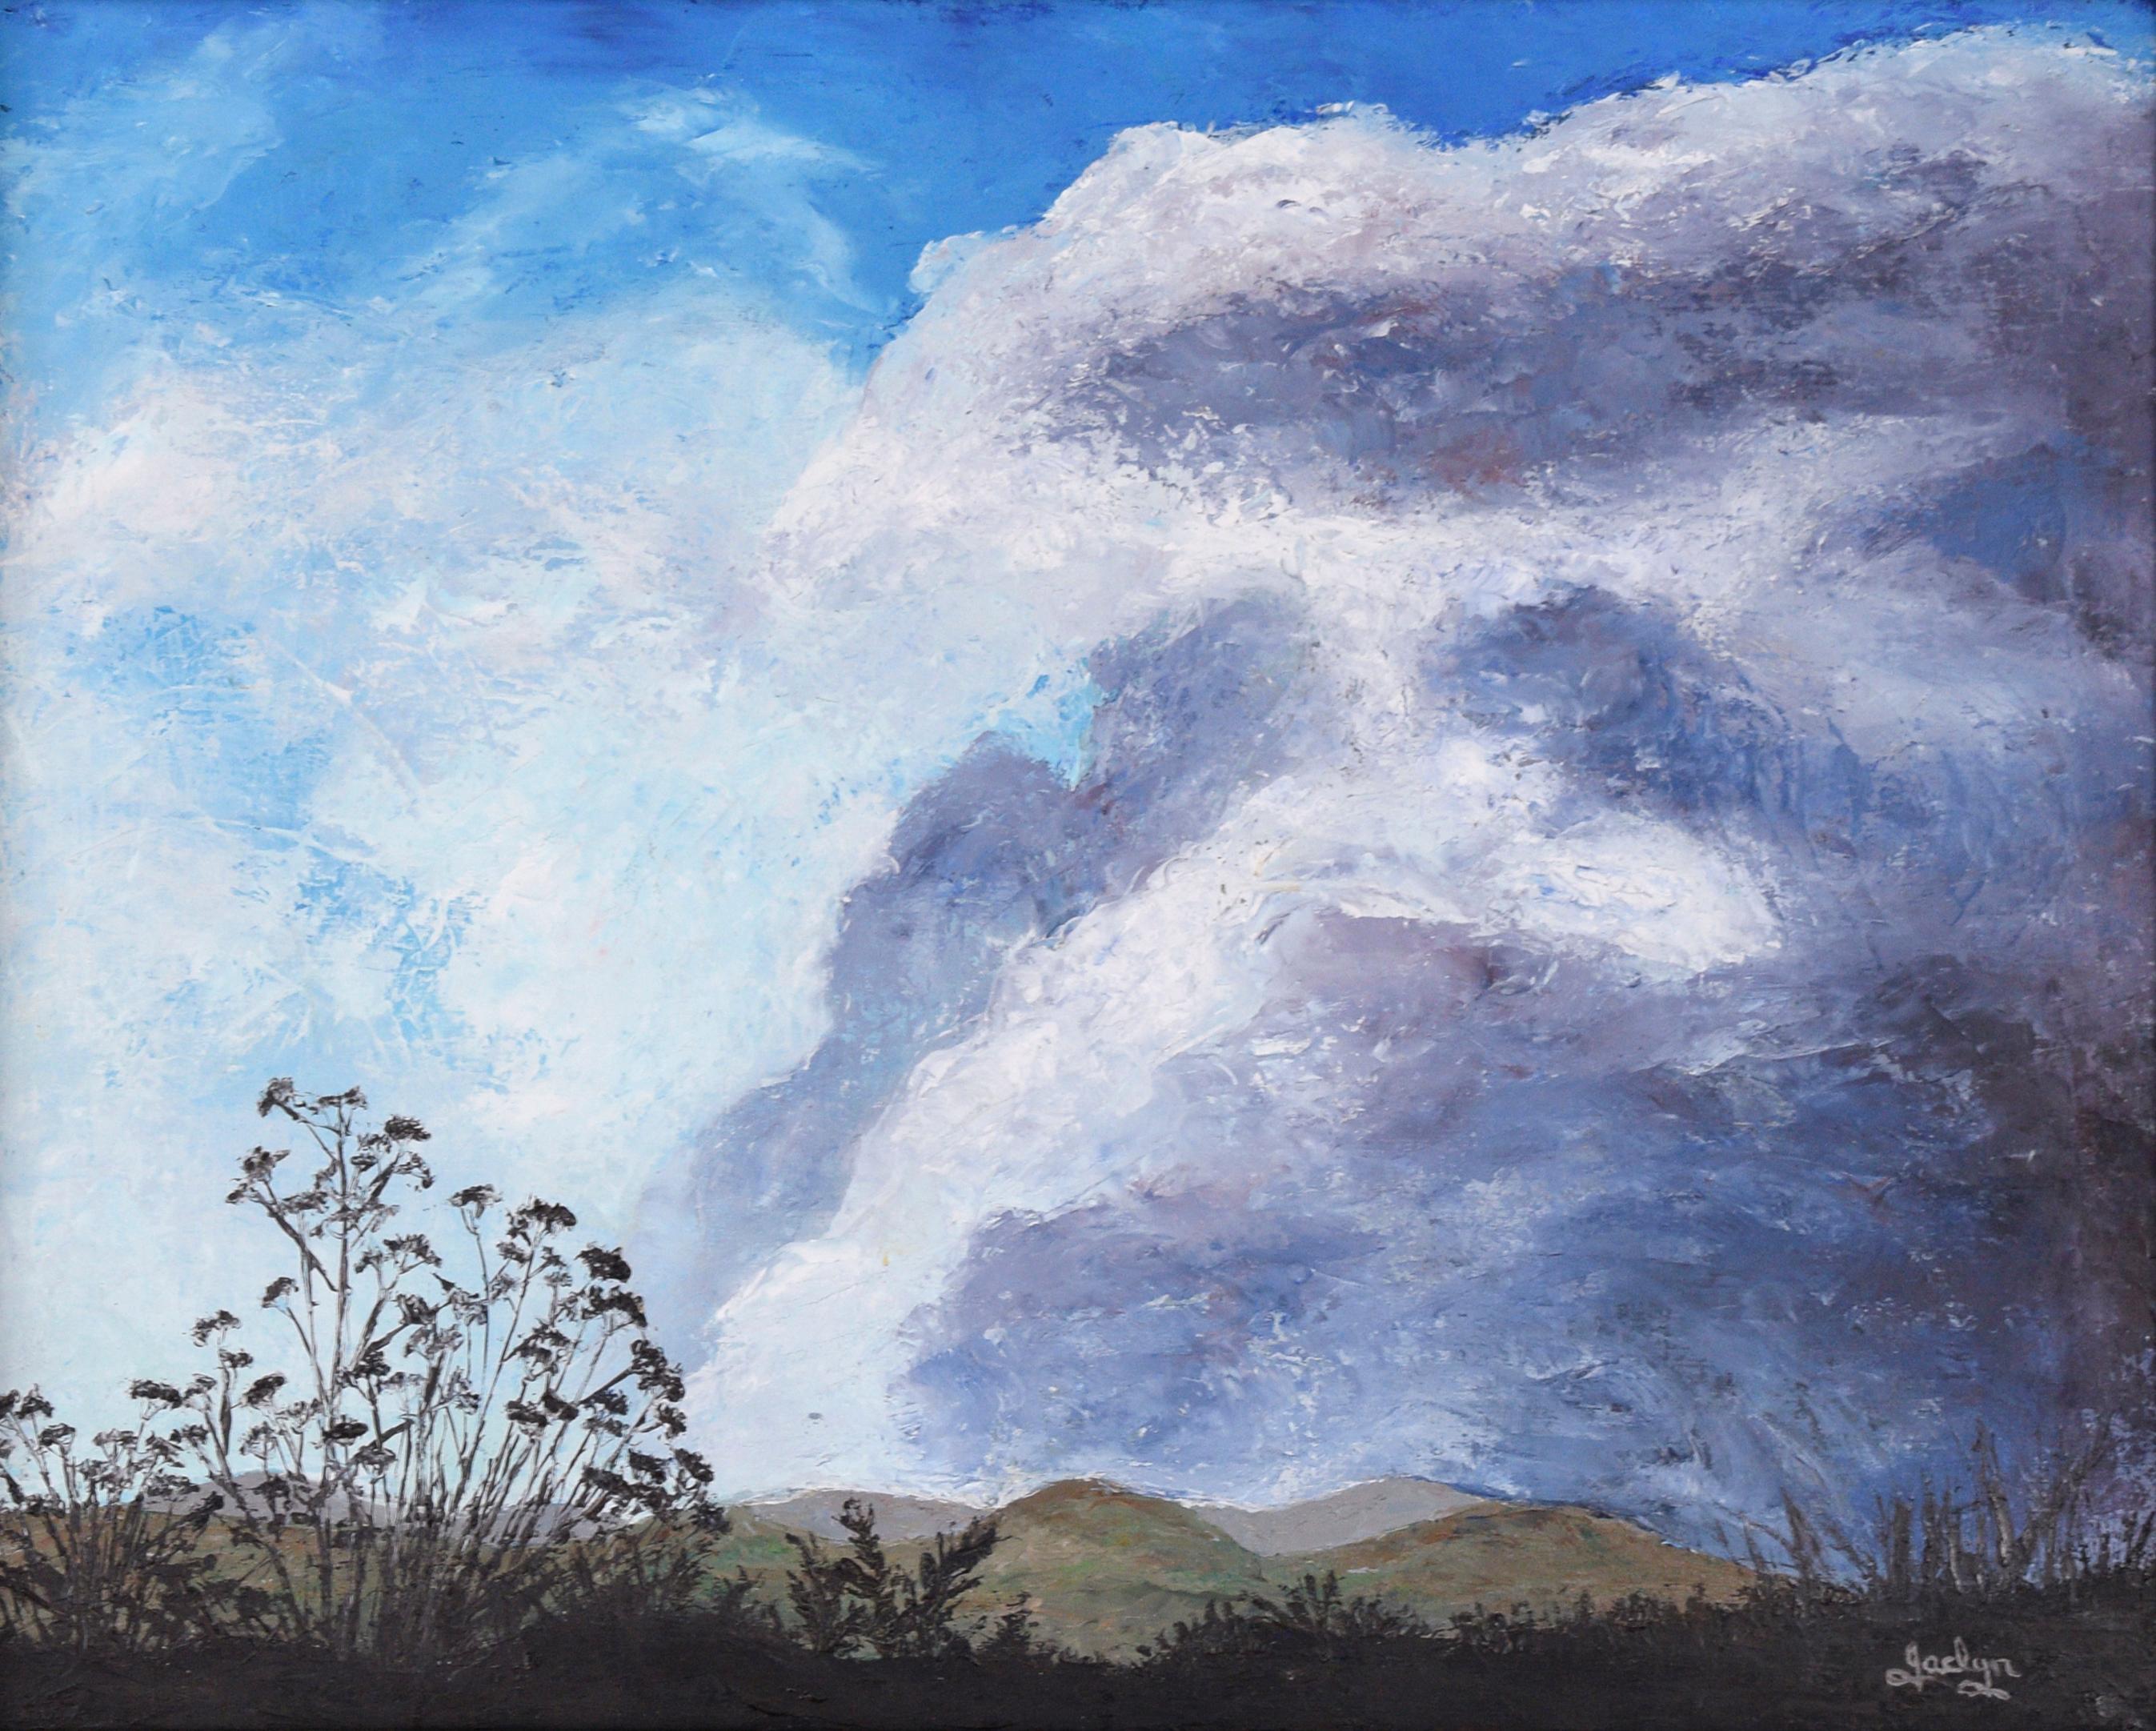 Purple Clouds Rolling Over the Hills - Landscape - Painting by Jaclyn Housman